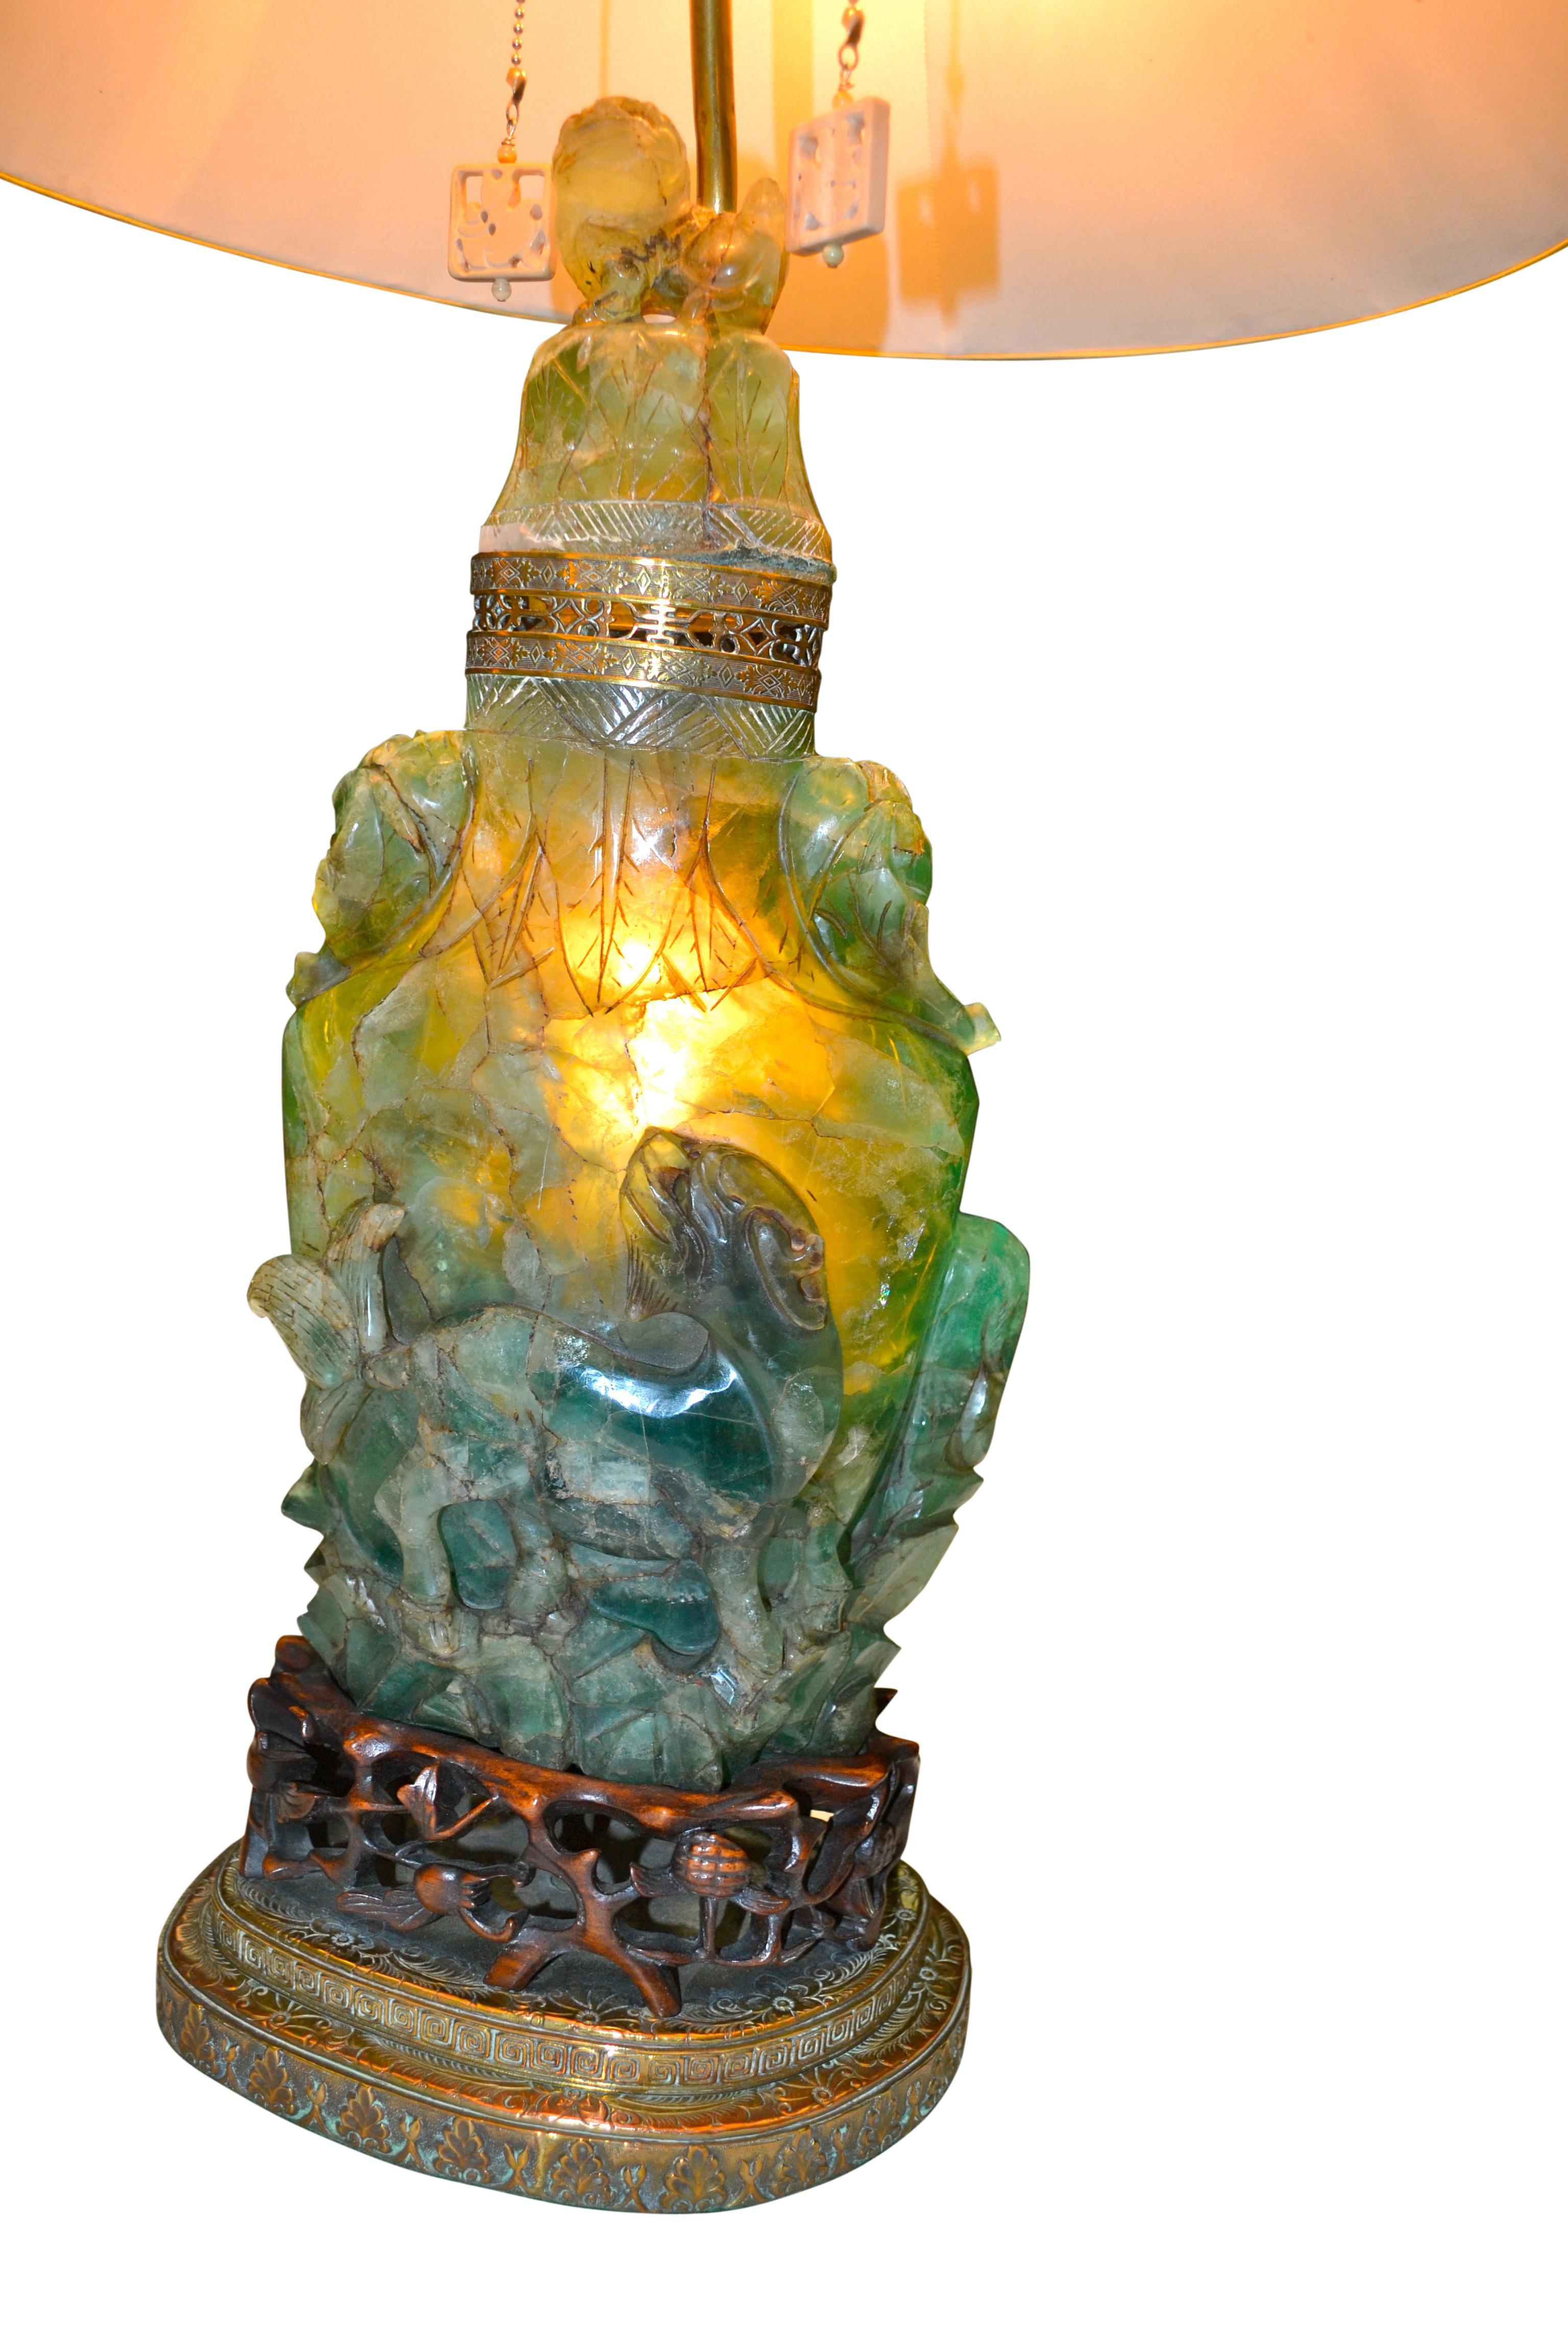 A relatively large Chinese carved stone lamp mounted on a stepped brass and a carved wood base. The carved stone is often referred to as Jadeite or Quartz but is in fact from the fluorite family. His lamp base was carved in China and exported to the